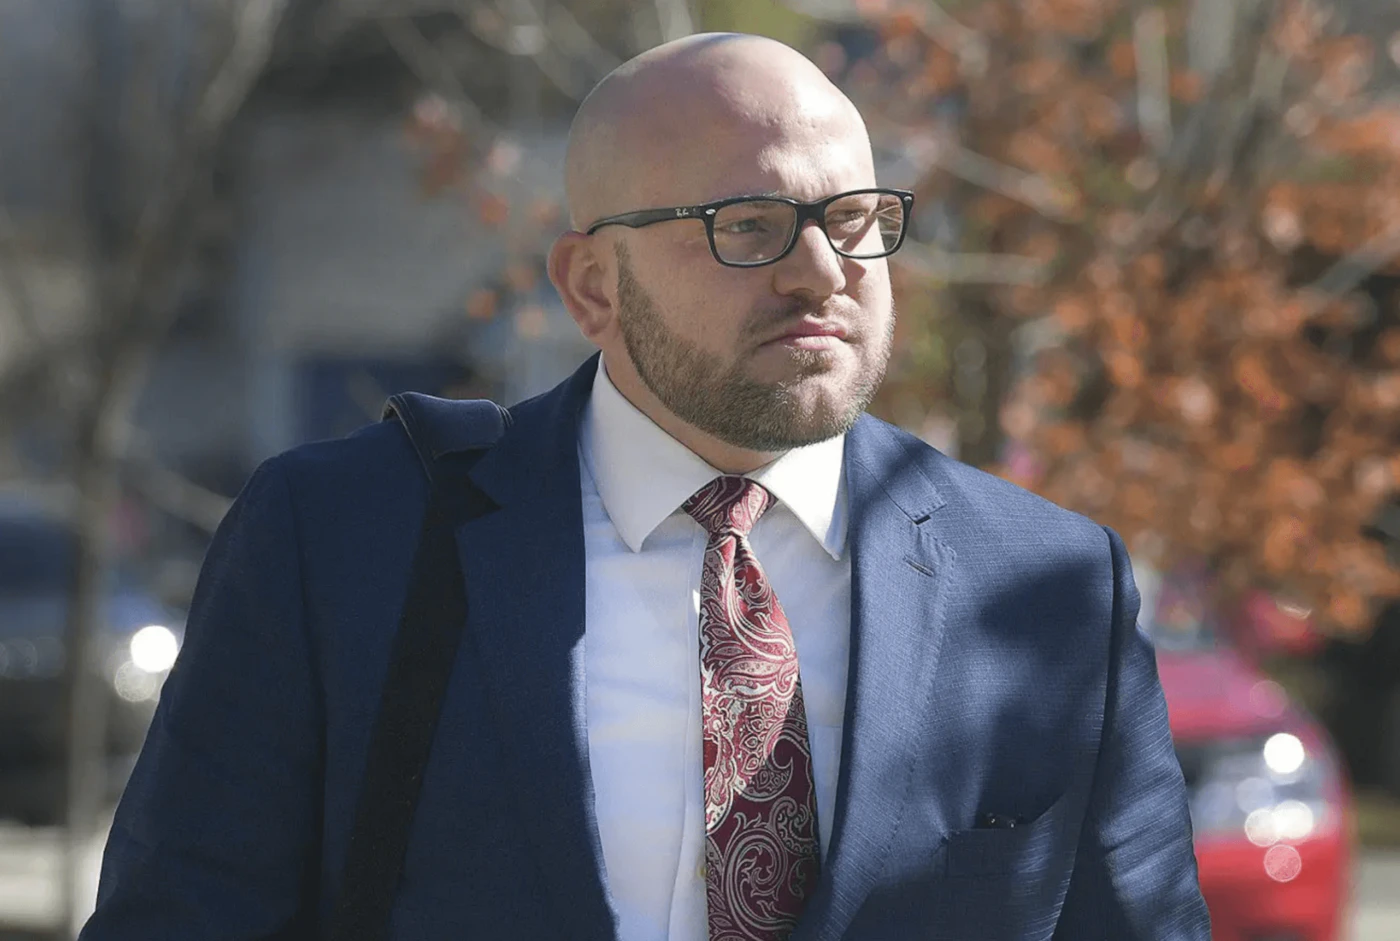 FILE: Former Somerset County D.A. Jeffrey Thomas arrives for a preliminary hearing at the Somerset County Courthouse in Somerset, Pa. on Oct. 21, 2021. (Todd Berkey/The Tribune-Democrat via AP)